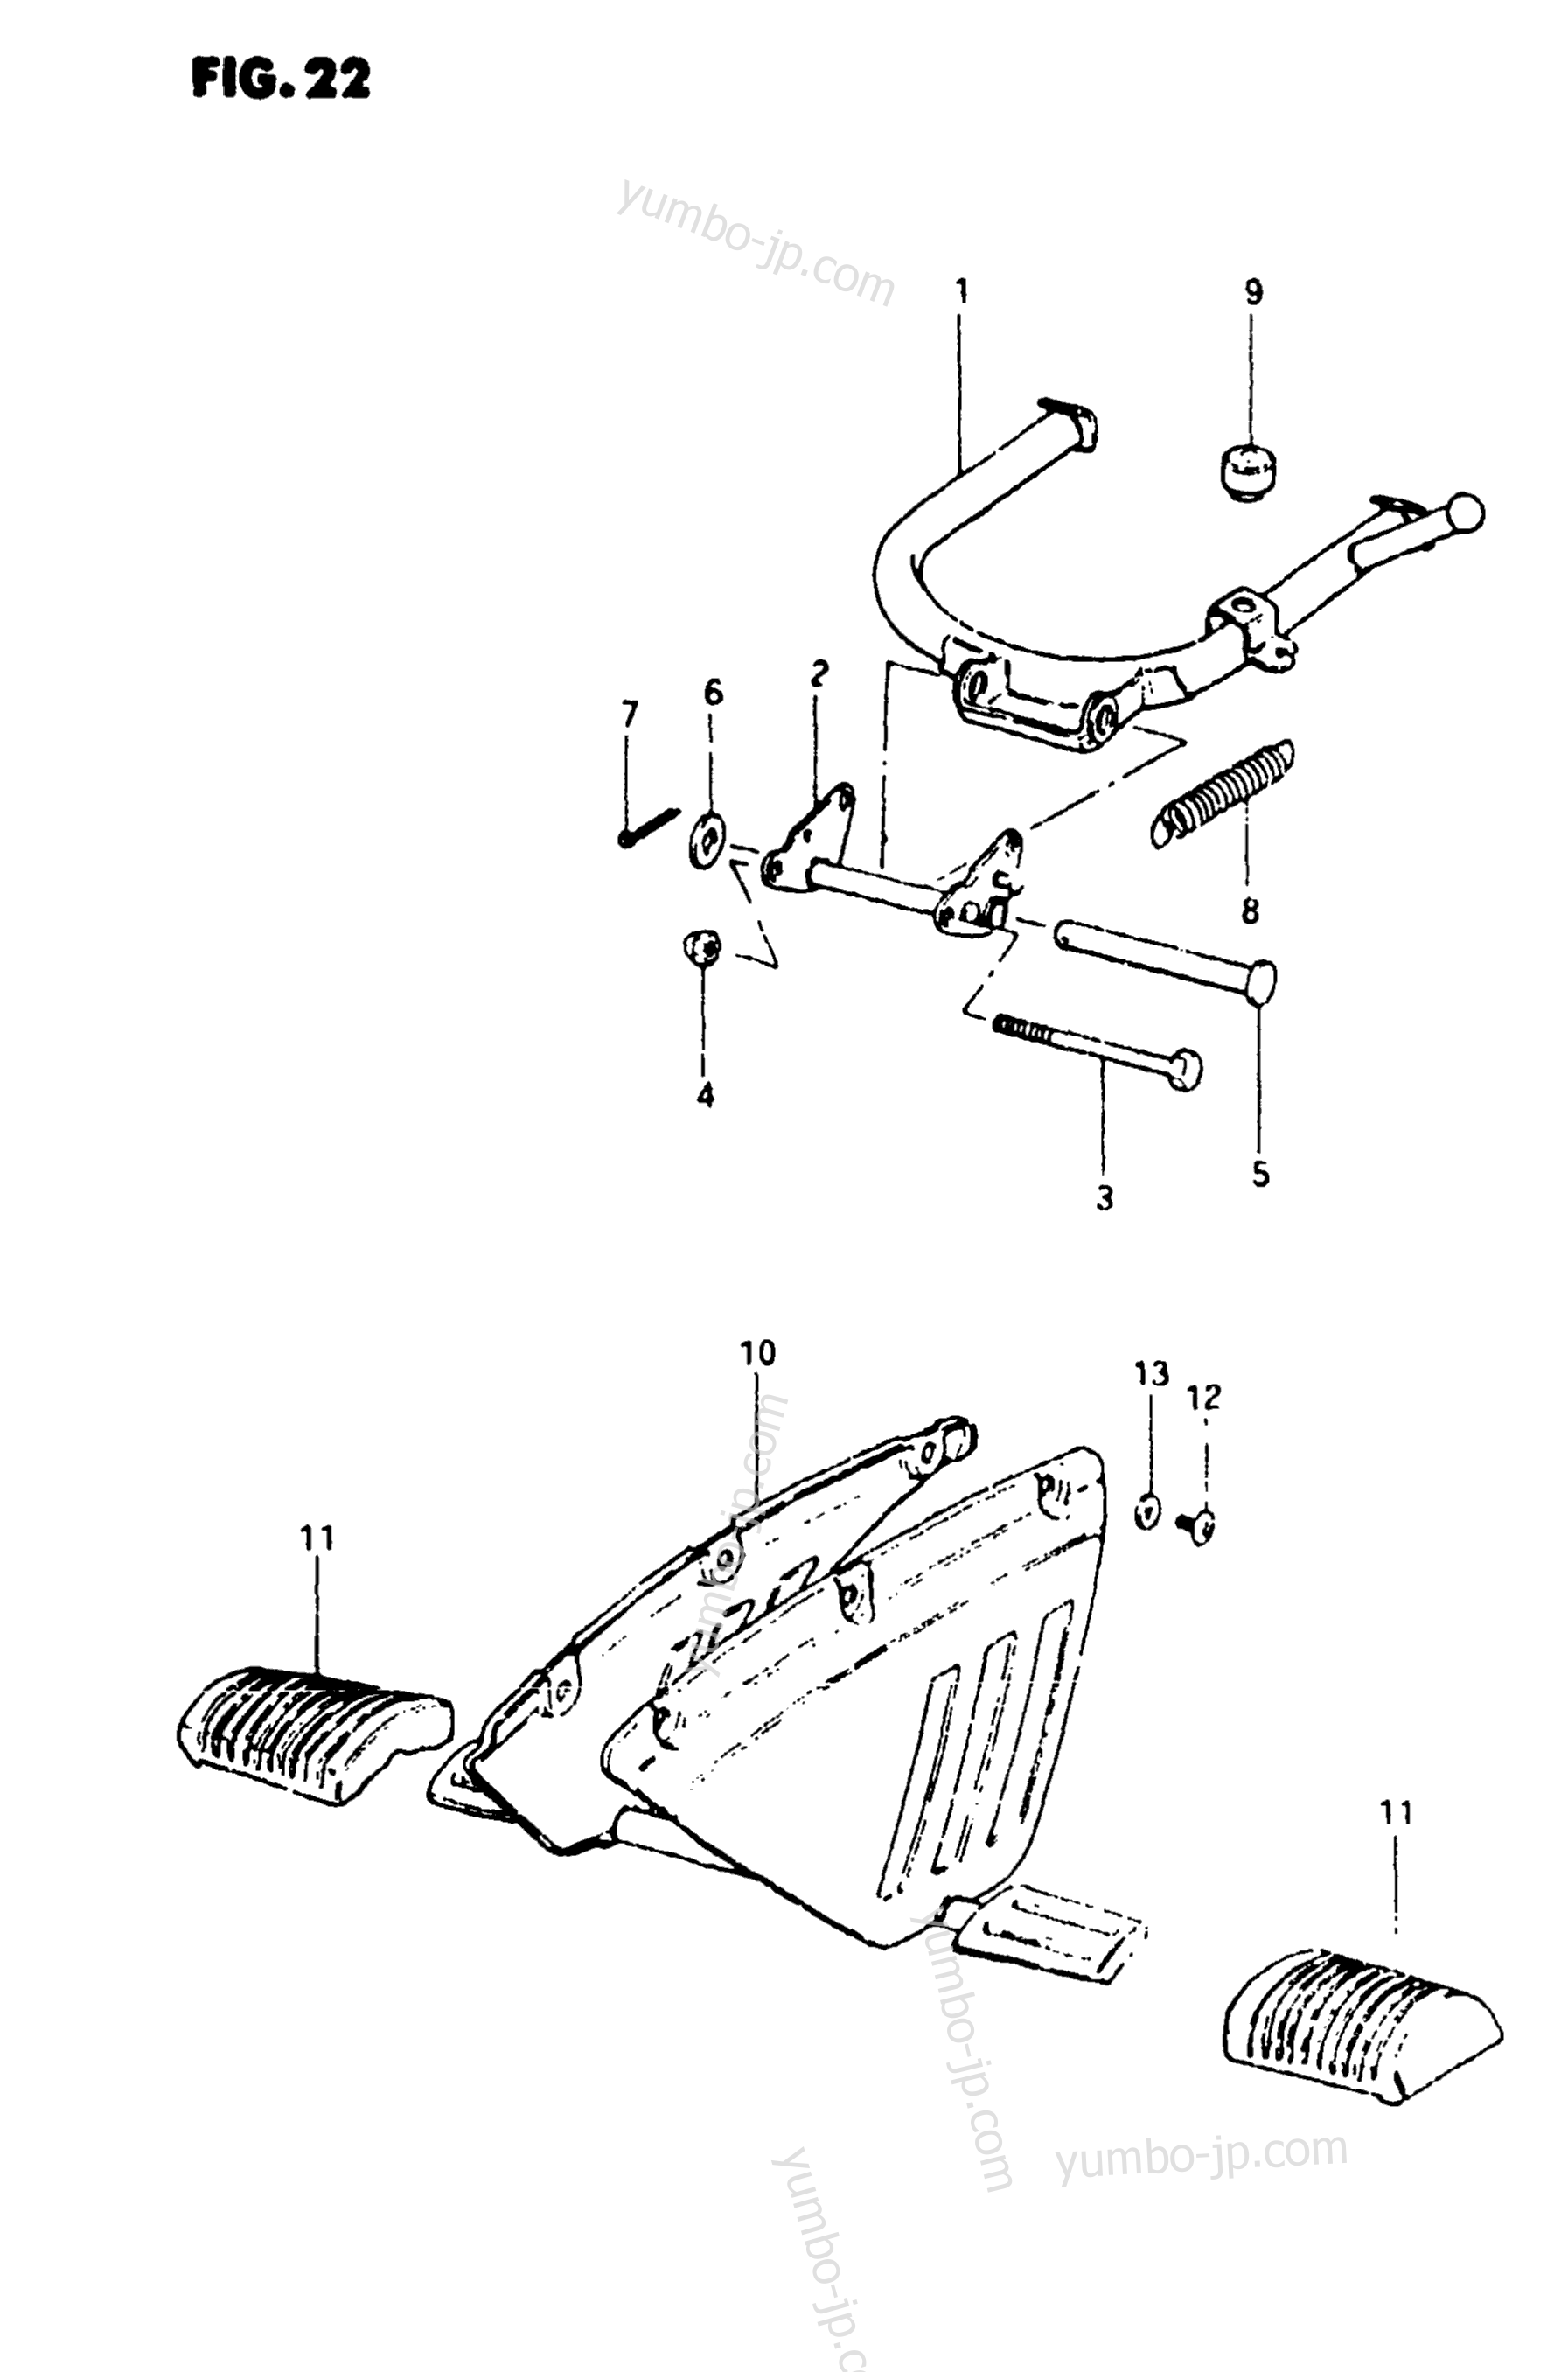 CENTER STAND - FOOTREST for scooters SUZUKI FA50 1981 year